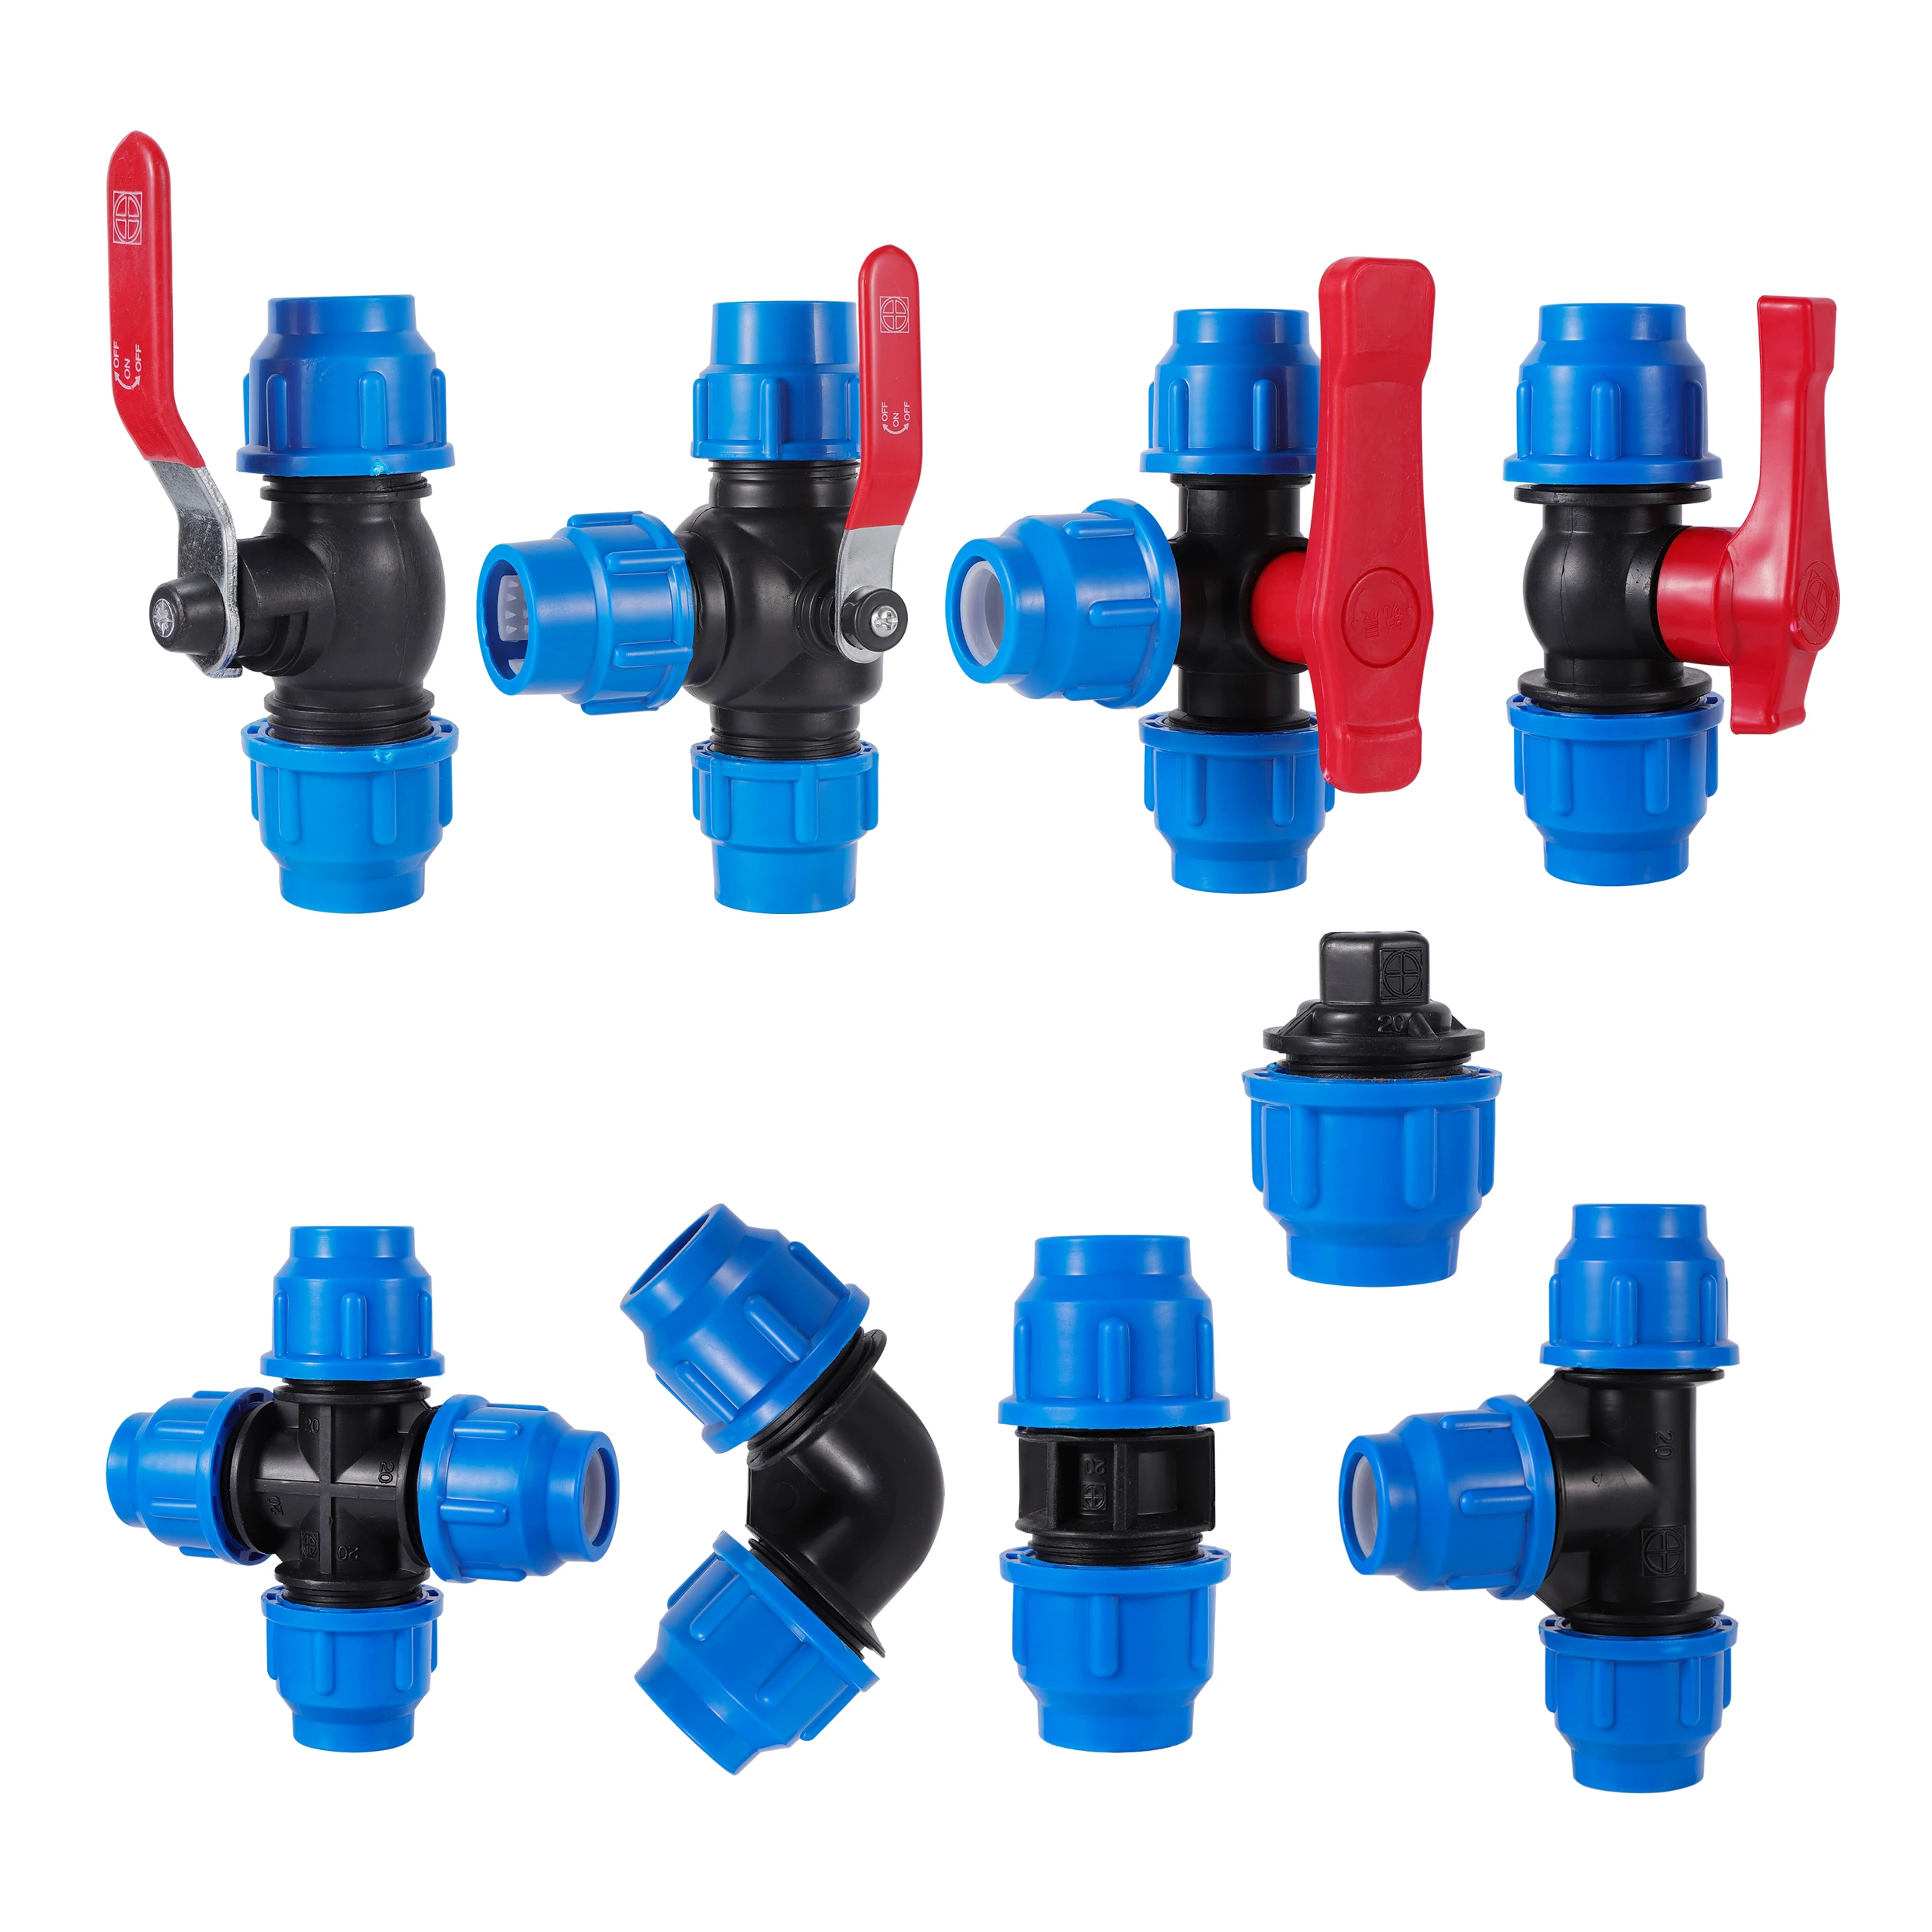 PVC 90° Elbow/End Cap/Ball Valve/Tee Connectors Water Pipe Adapter 20/25/32mm 